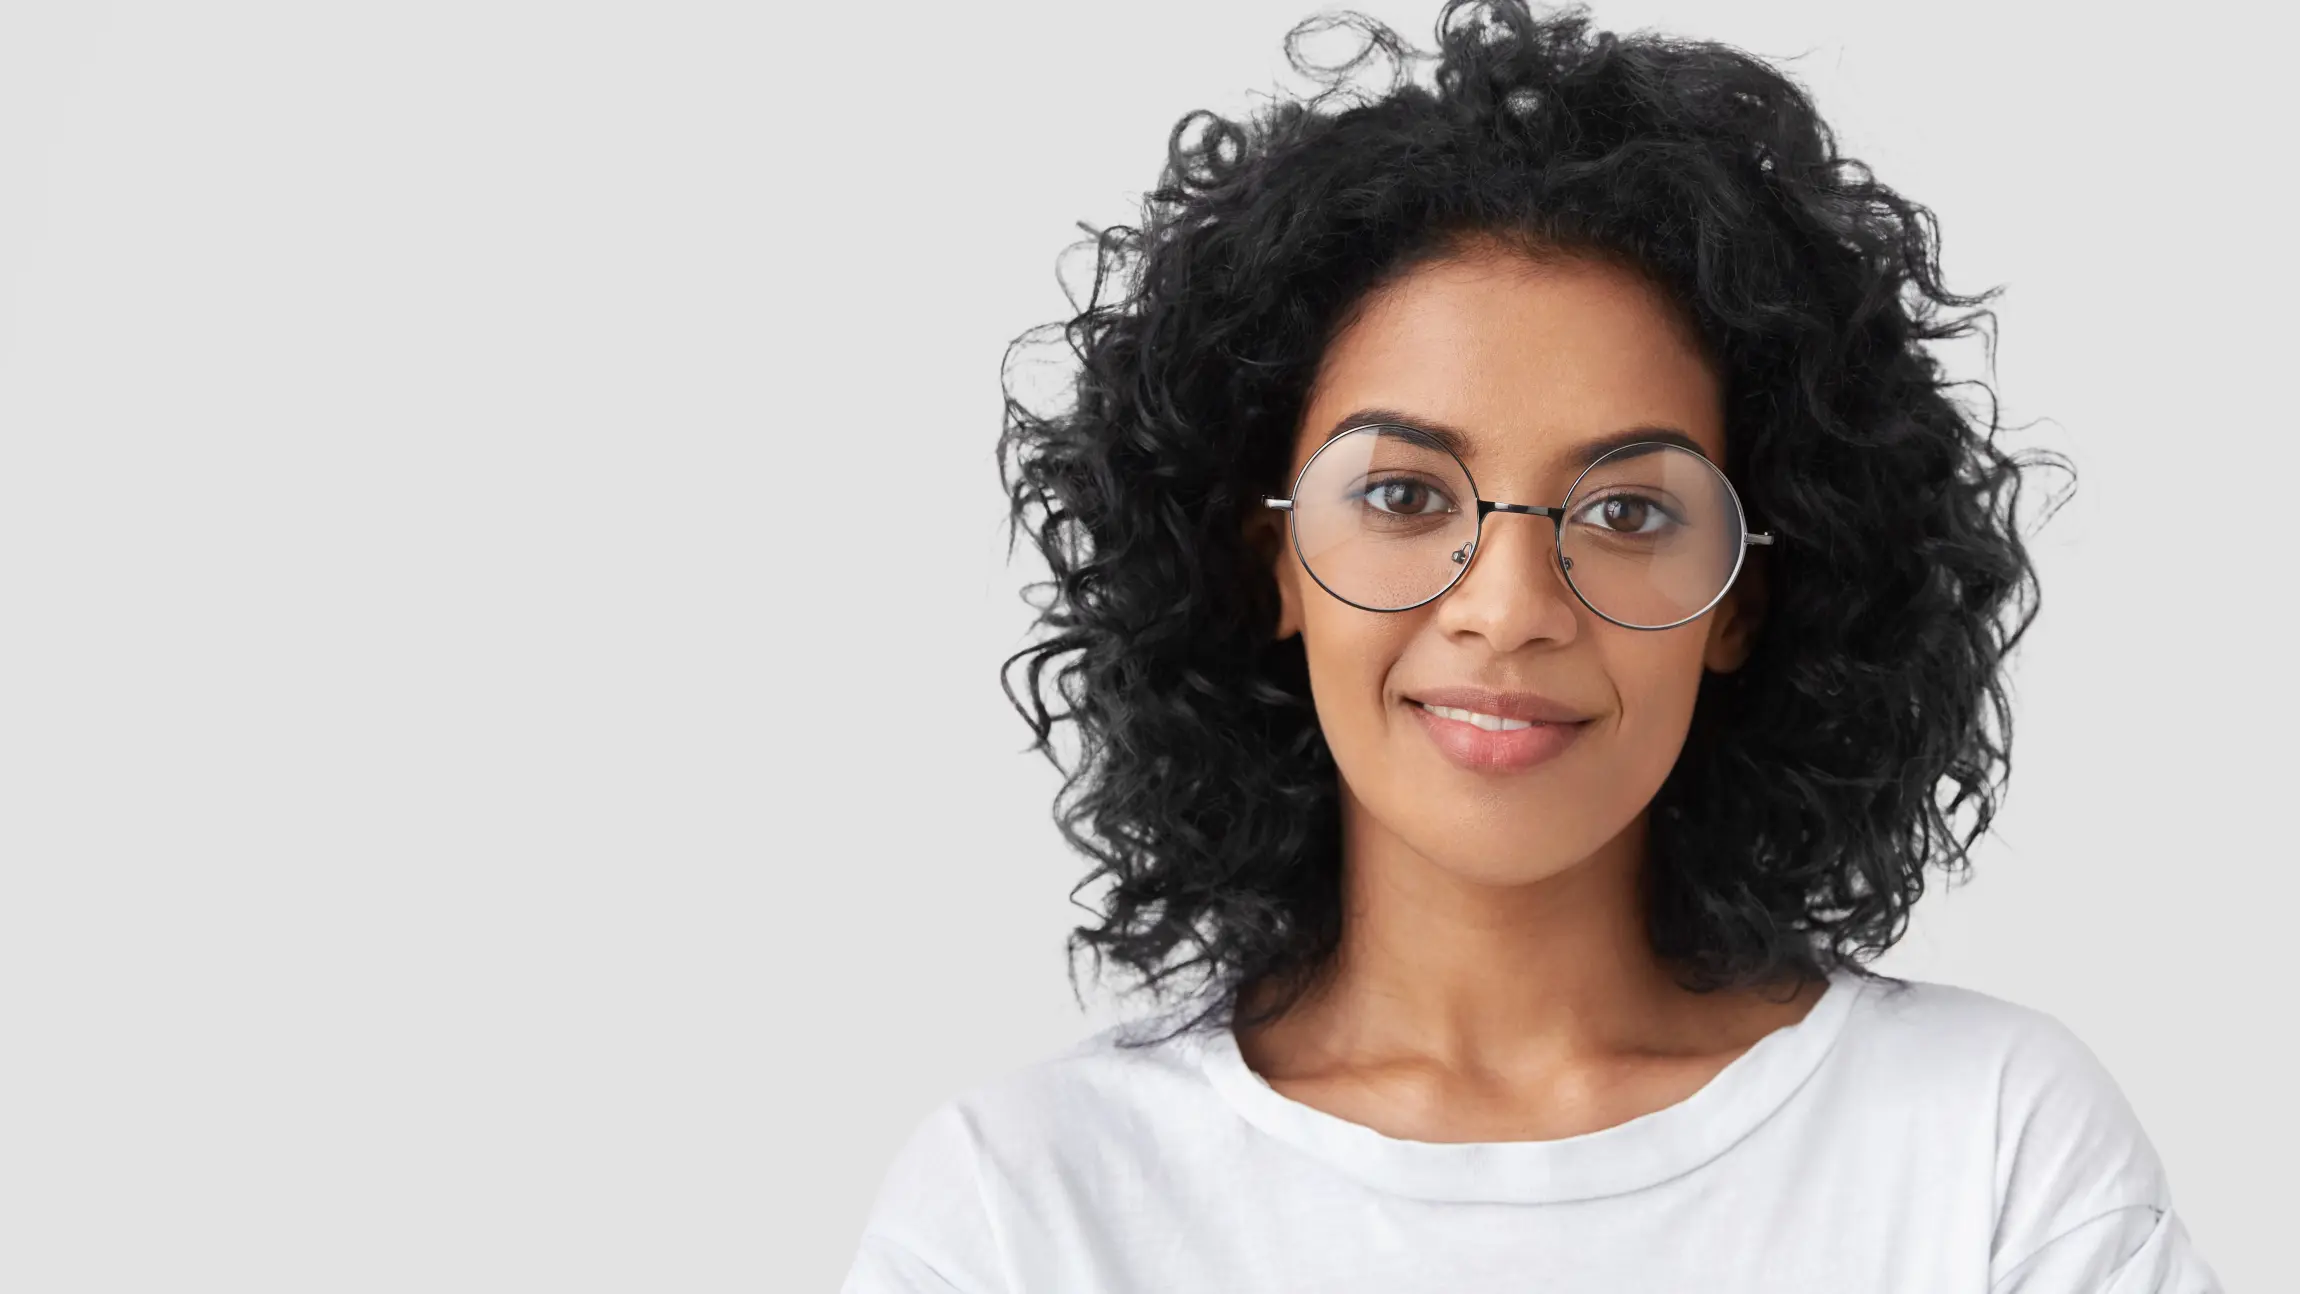 A woman with dark, curly hair and glasses looks smiling into the camera.